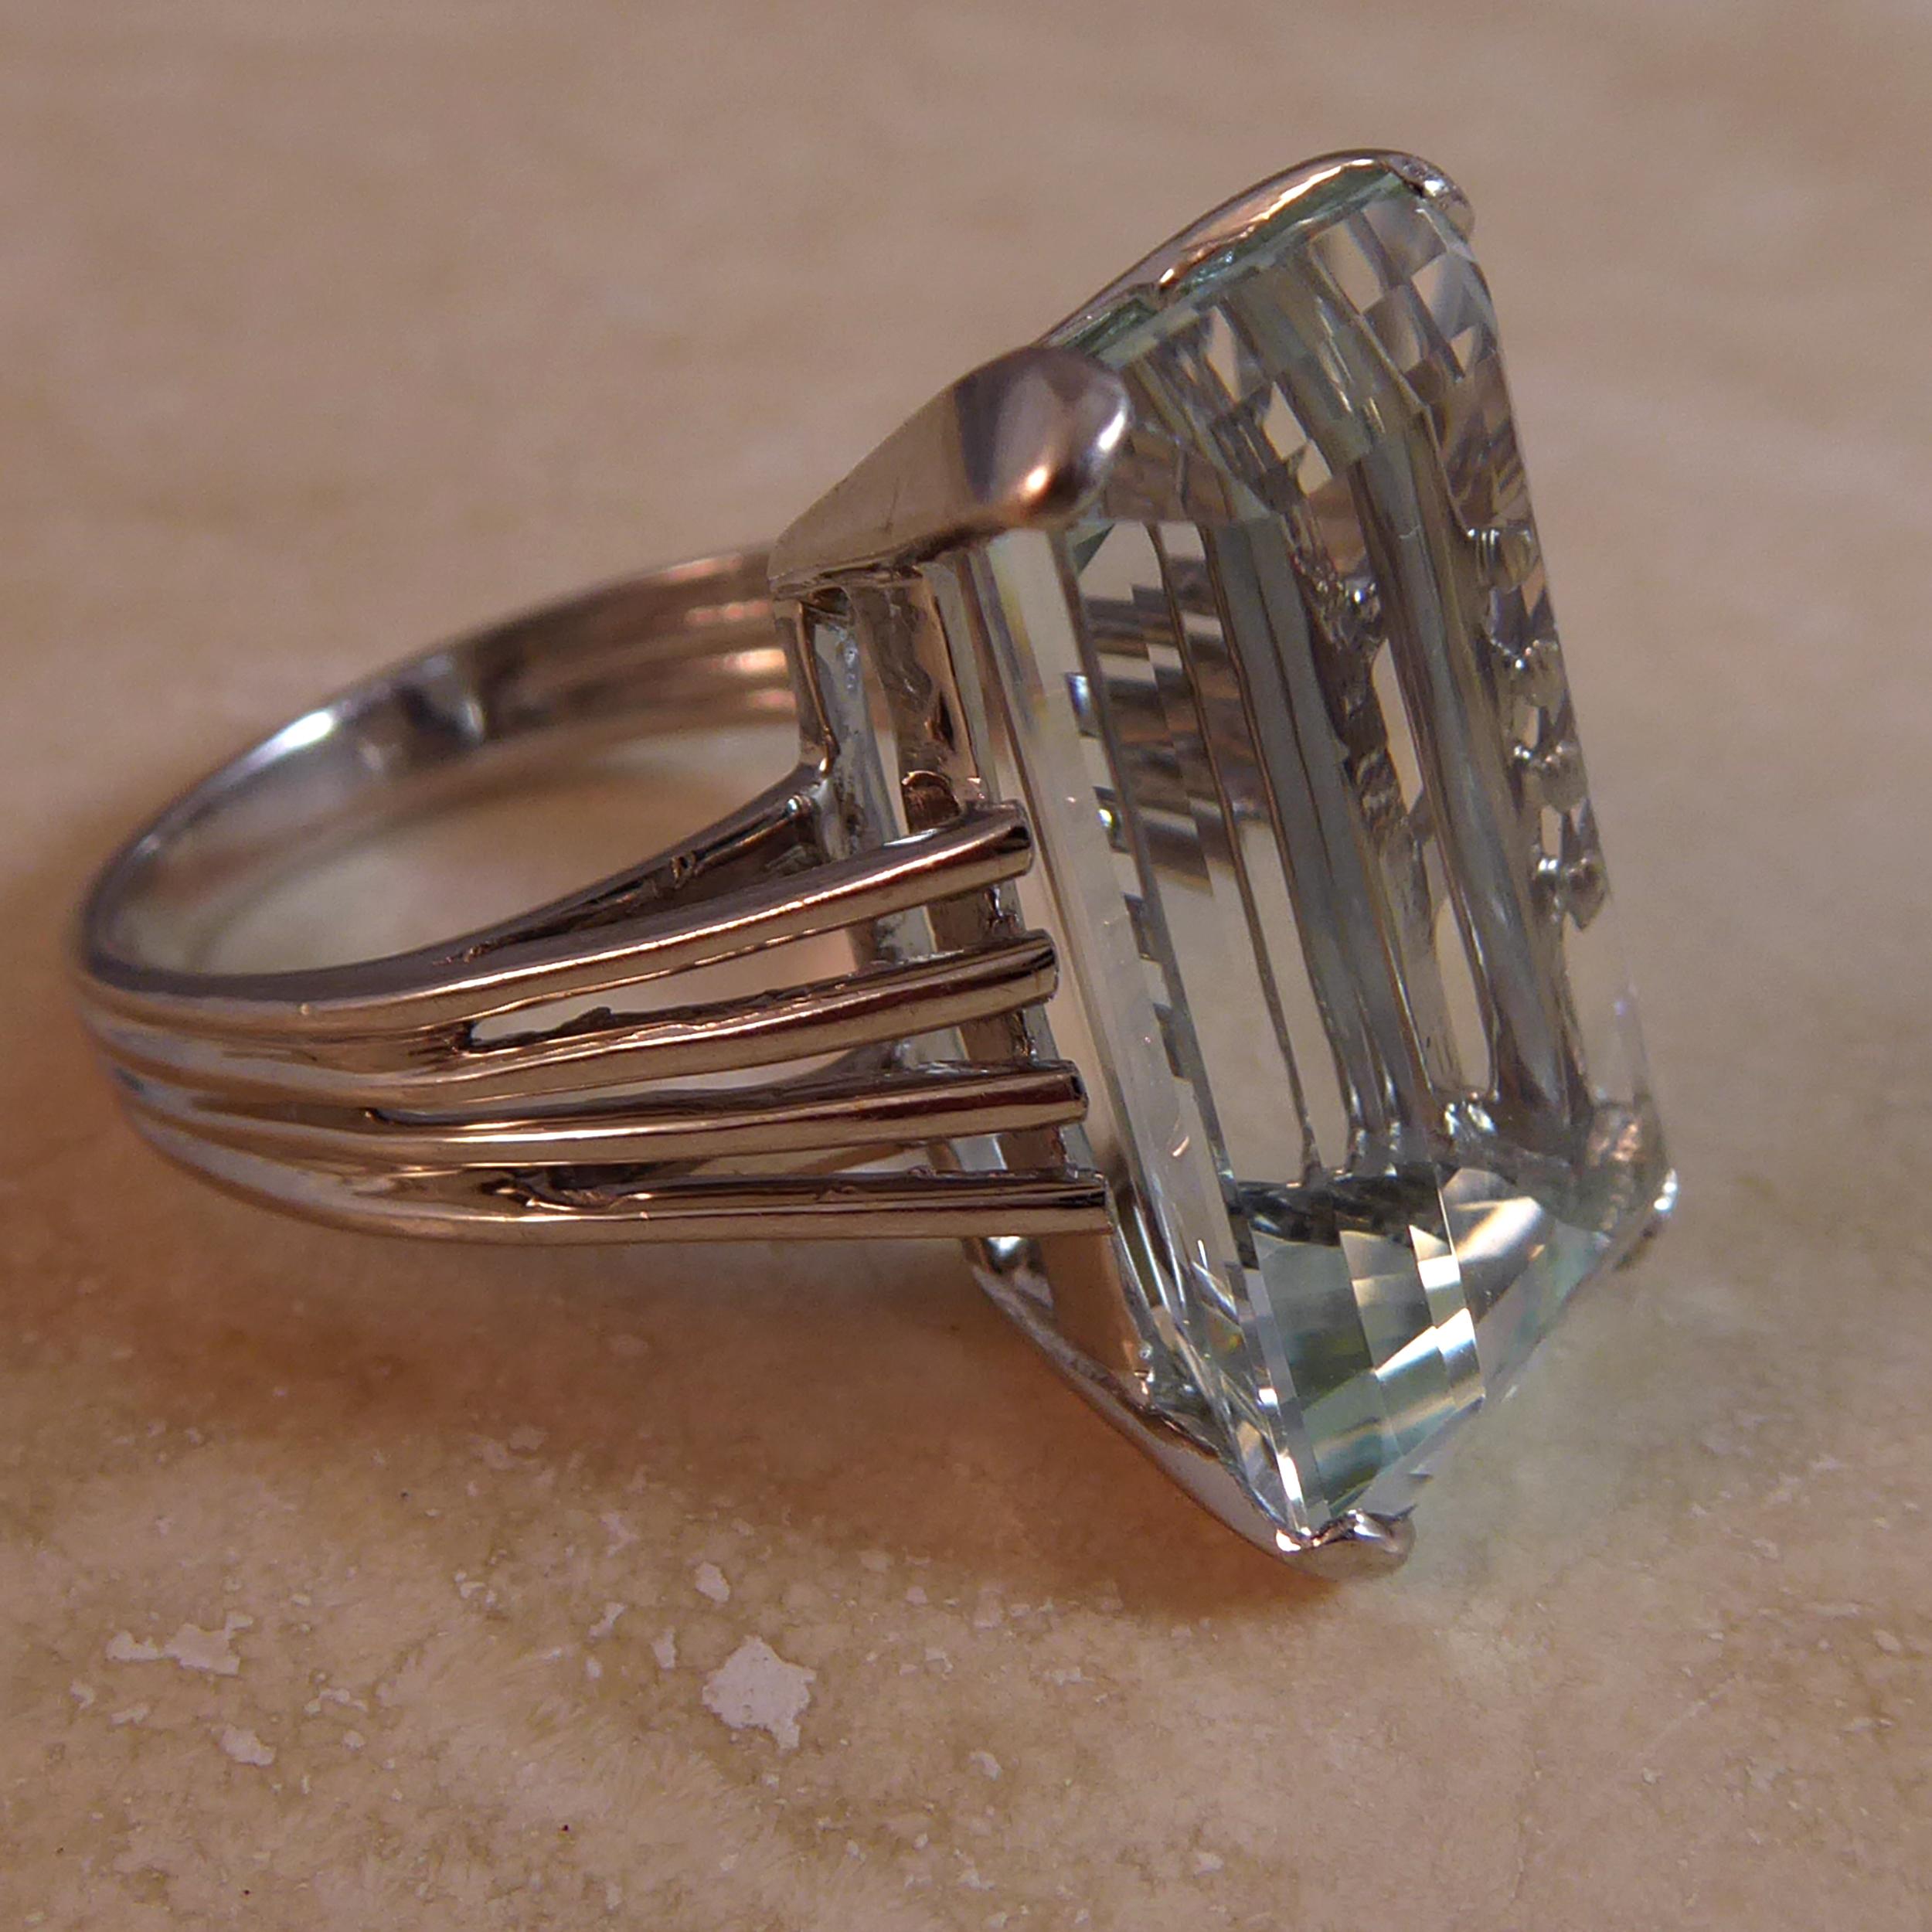 At 11.50 carat, this spectacular vintage aquamarine ring needs no other embellishment.  The rectangular cut cornered, step cut gemstone is held in white gold four corner claw setting allowing the beauty of the gemstone to shine through unhindered by